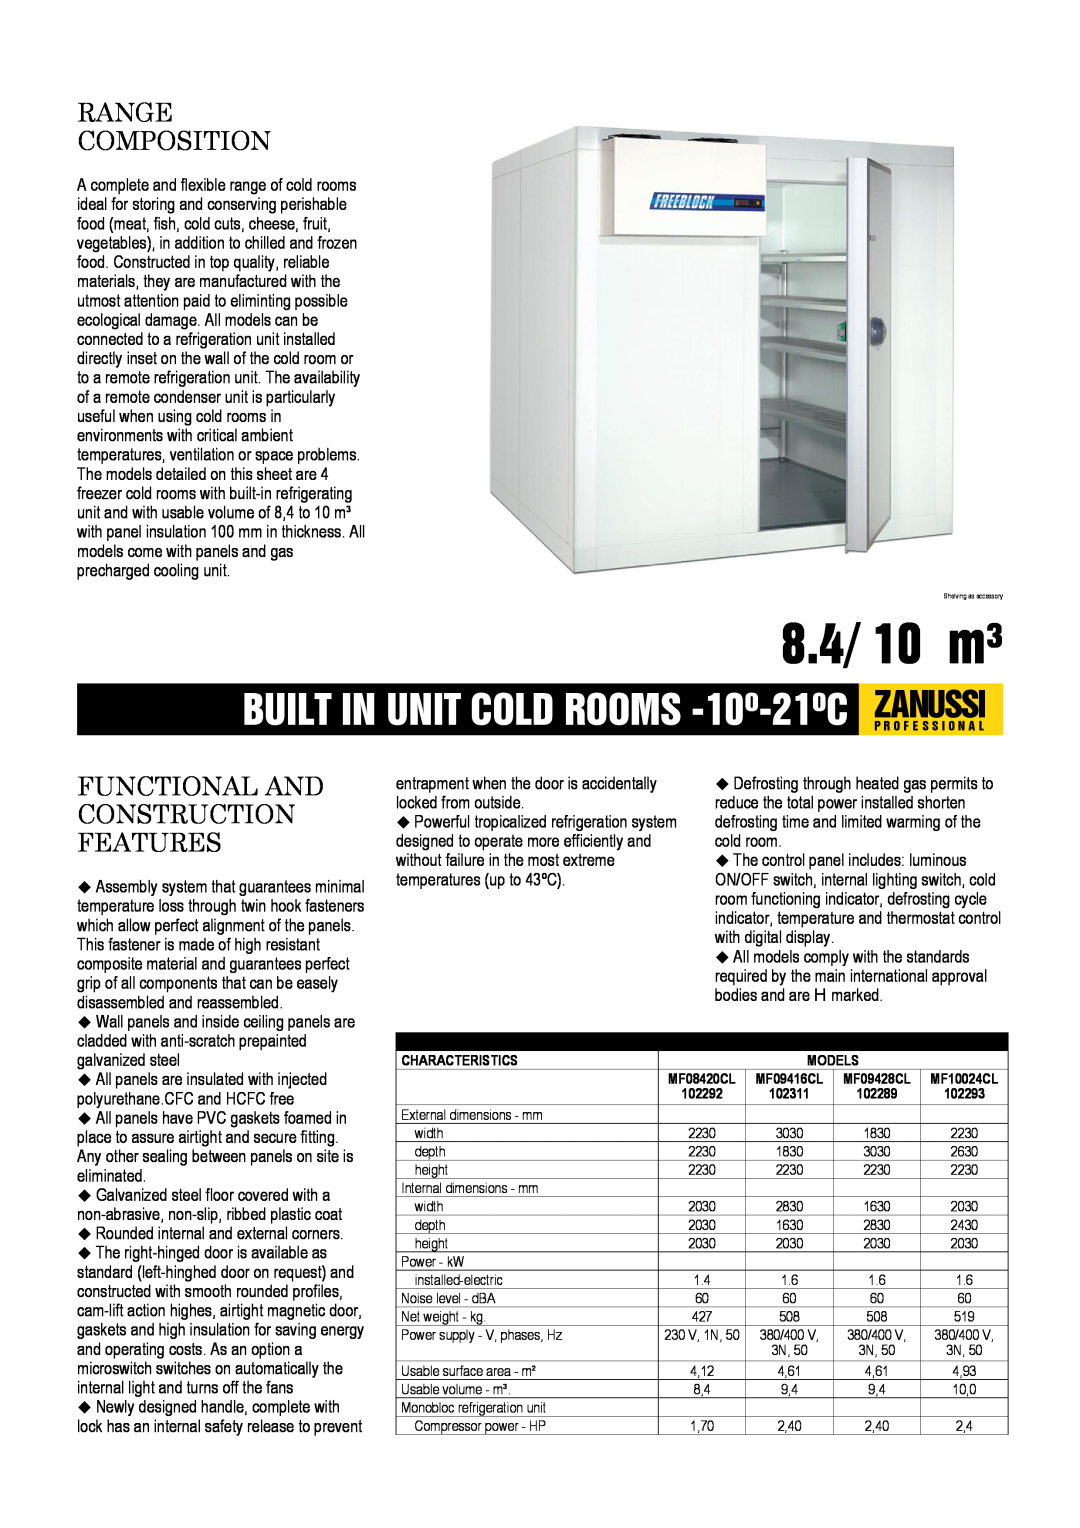 Zanussi MF09428CL, MF10024CL, MF08420CL dimensions 8.4/ 10 m³, Range Composition, Functional And Construction Features 